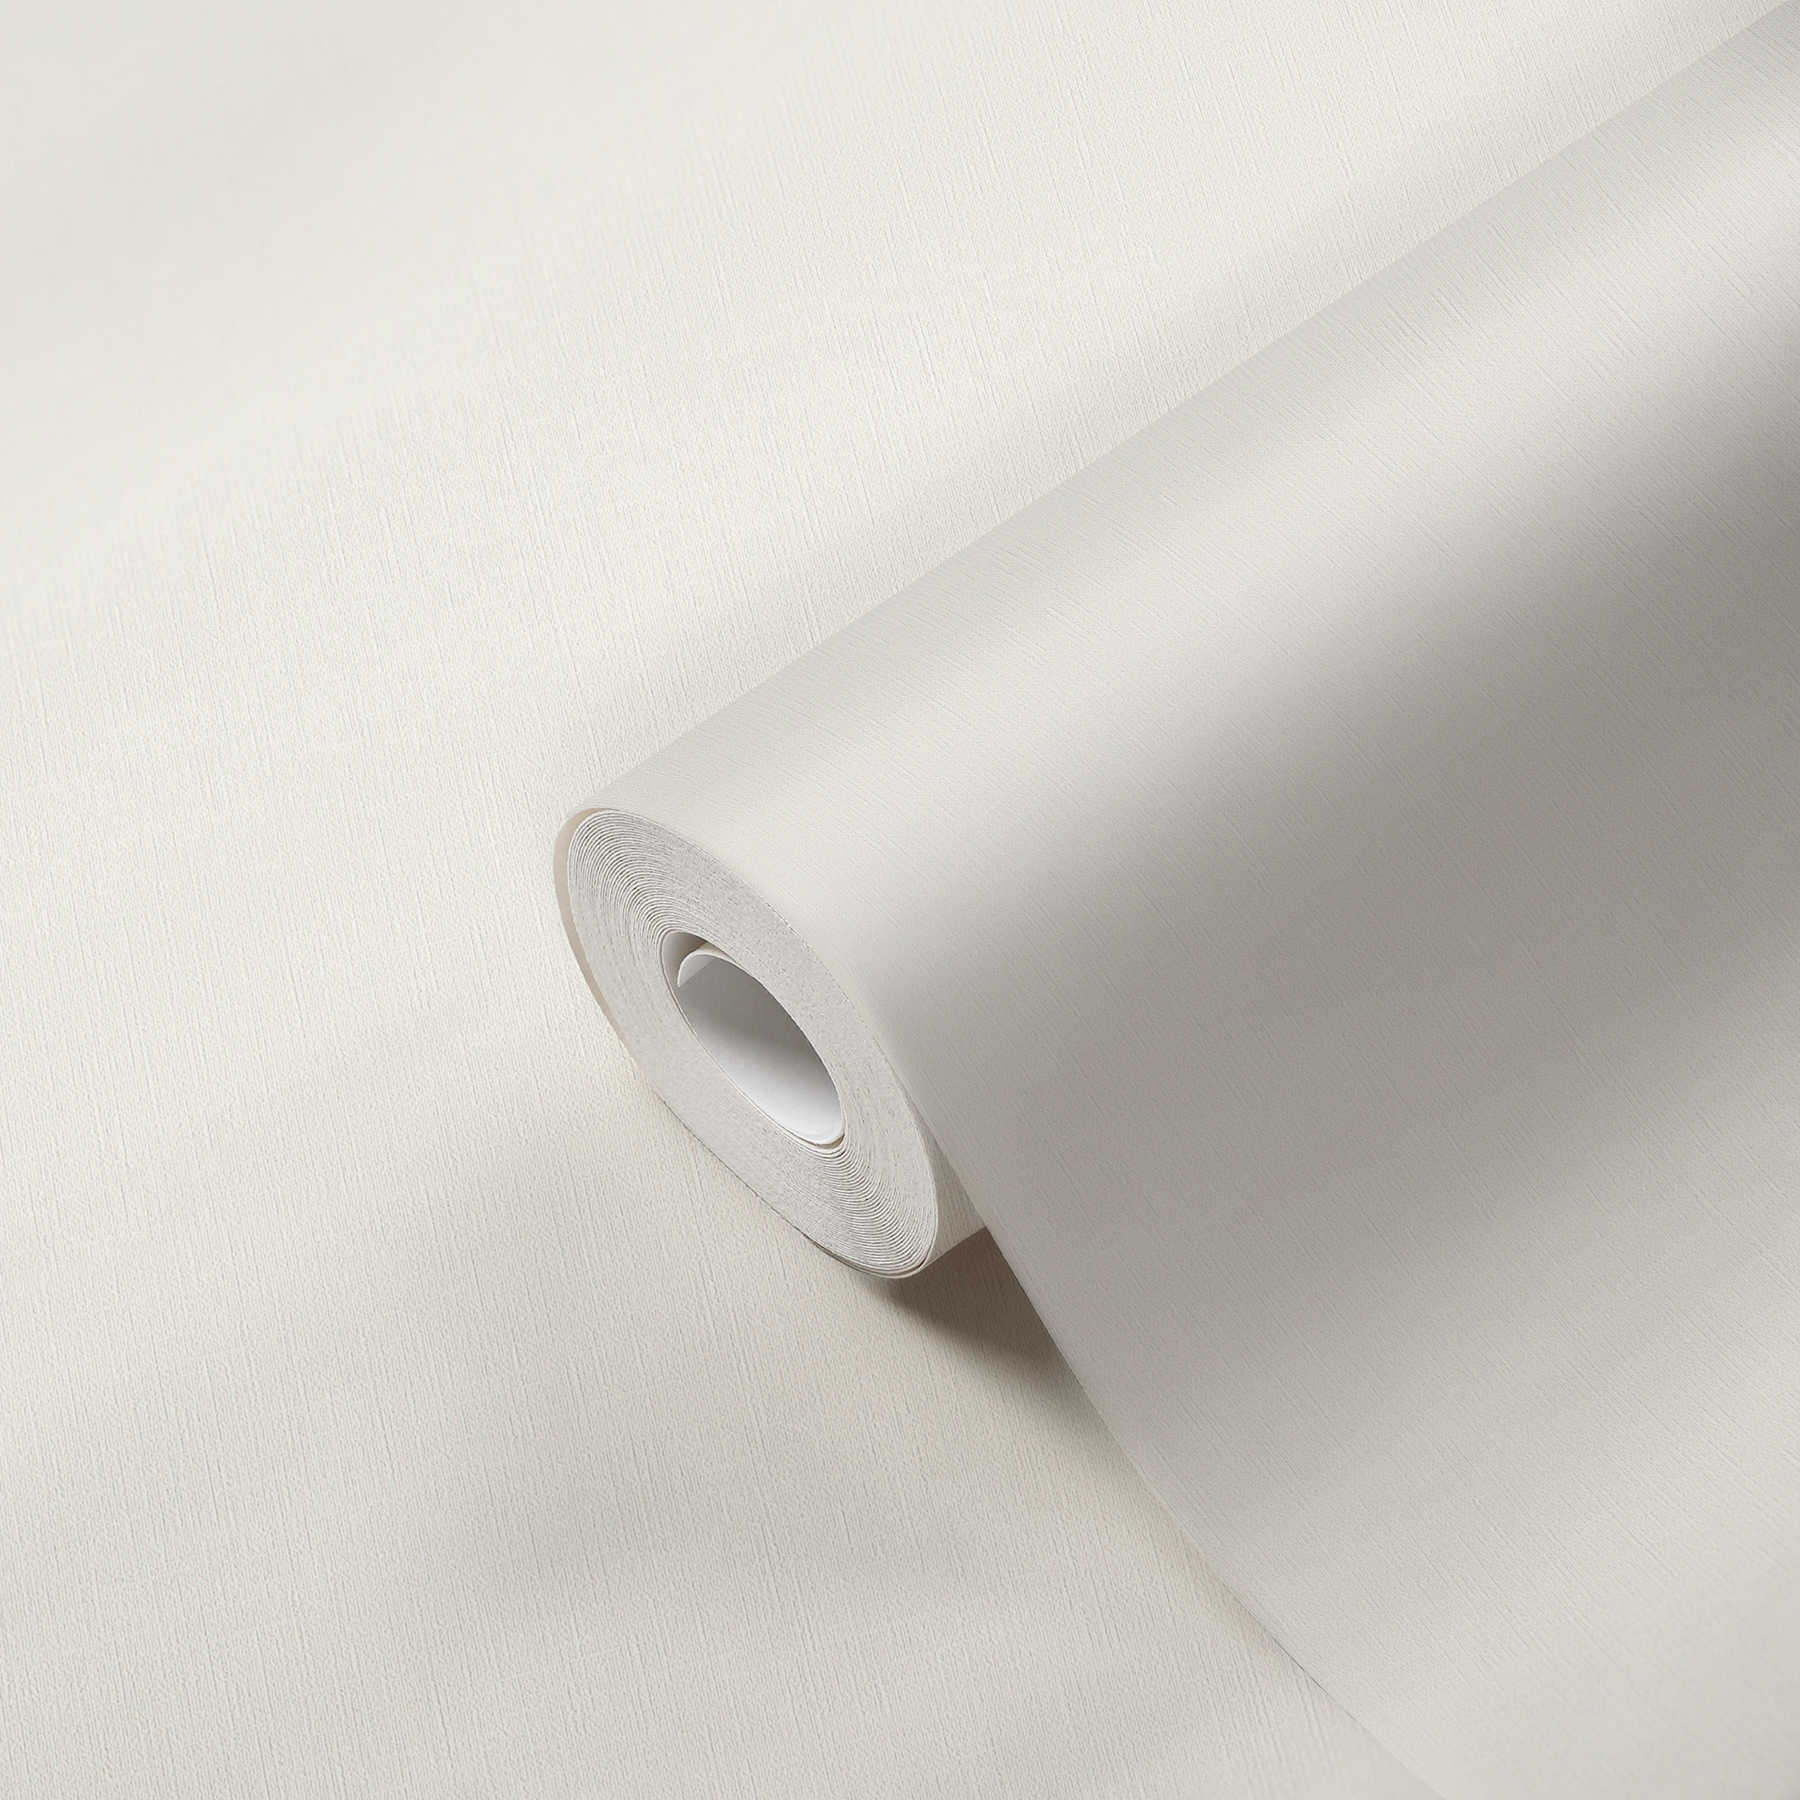             Plain wallpaper non-woven, muted white with satin finish
        